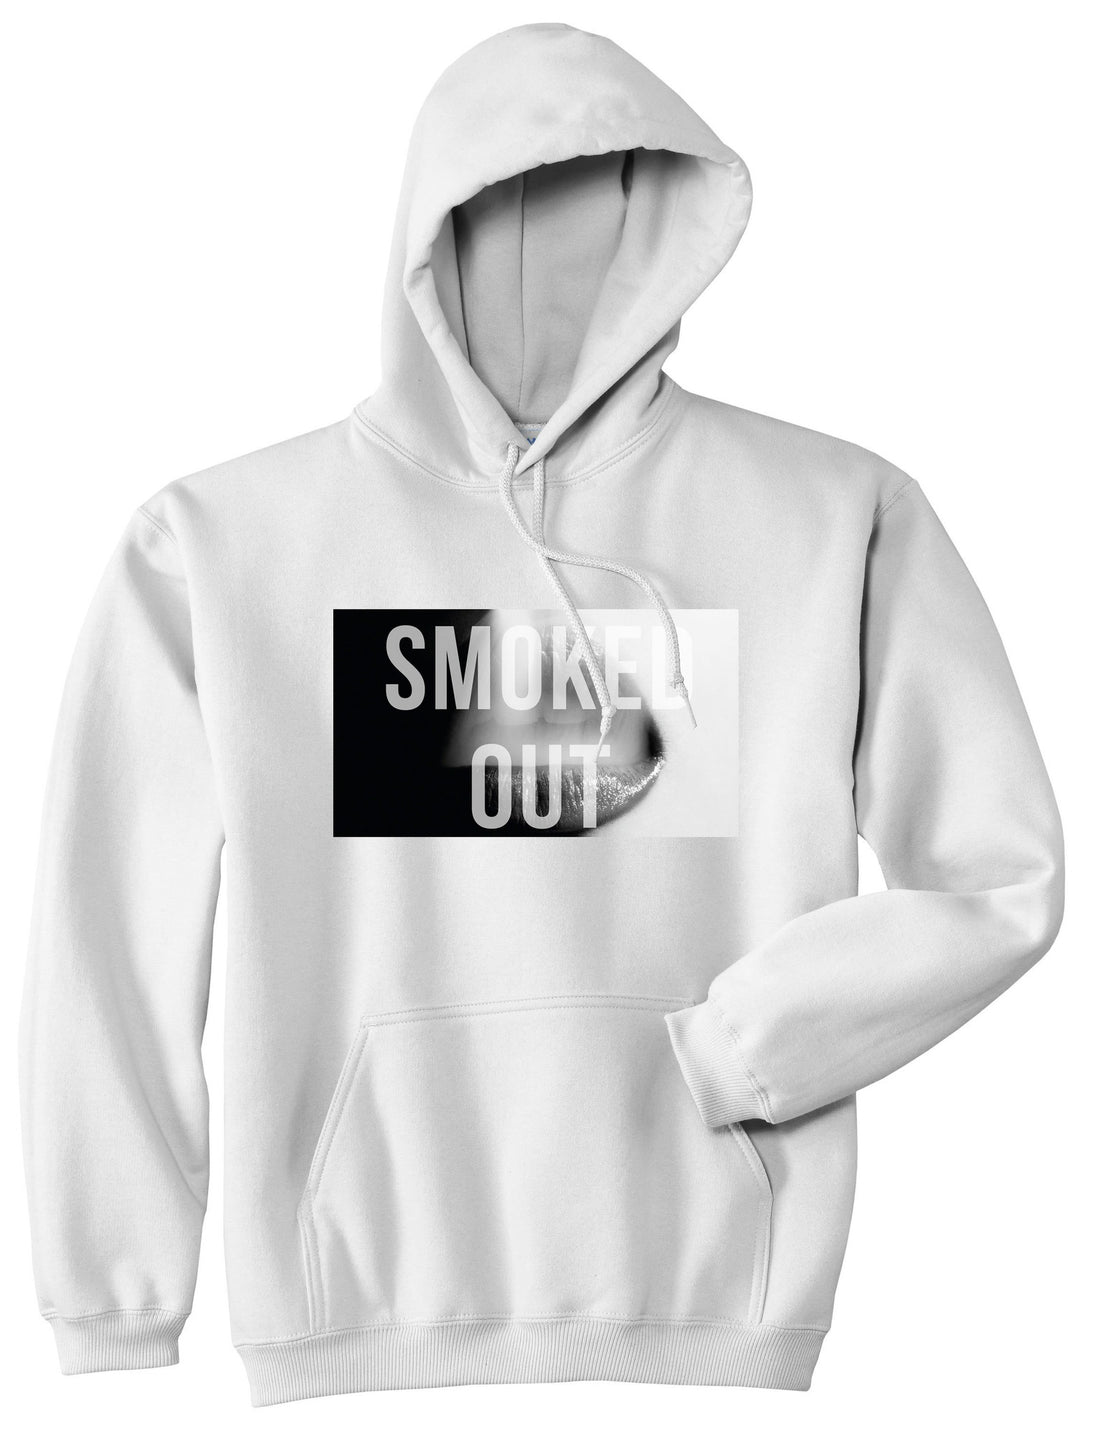 Smoked Out Weed Marijuana Girls Pot New York Pullover Hoodie Hoody in White by Kings Of NY